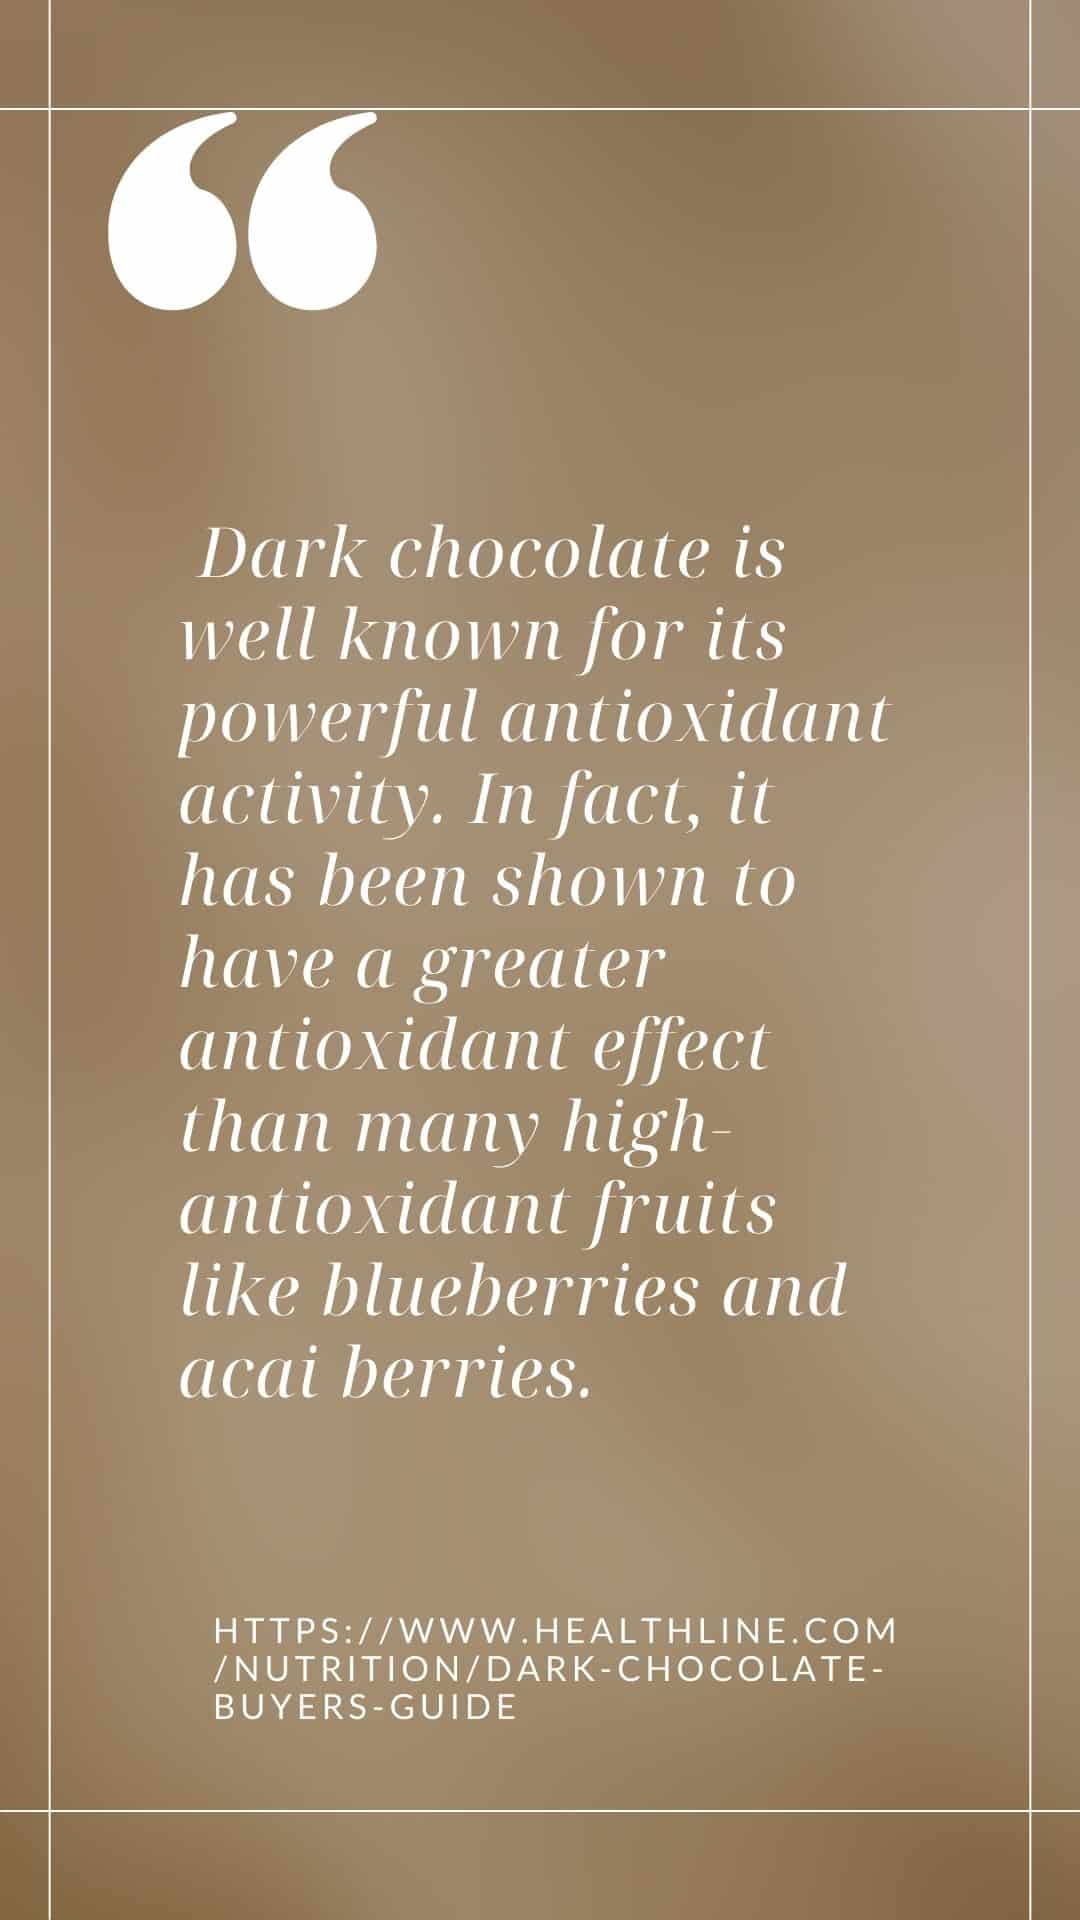 !uote about dark chocolate as a powerful antioxidant. 